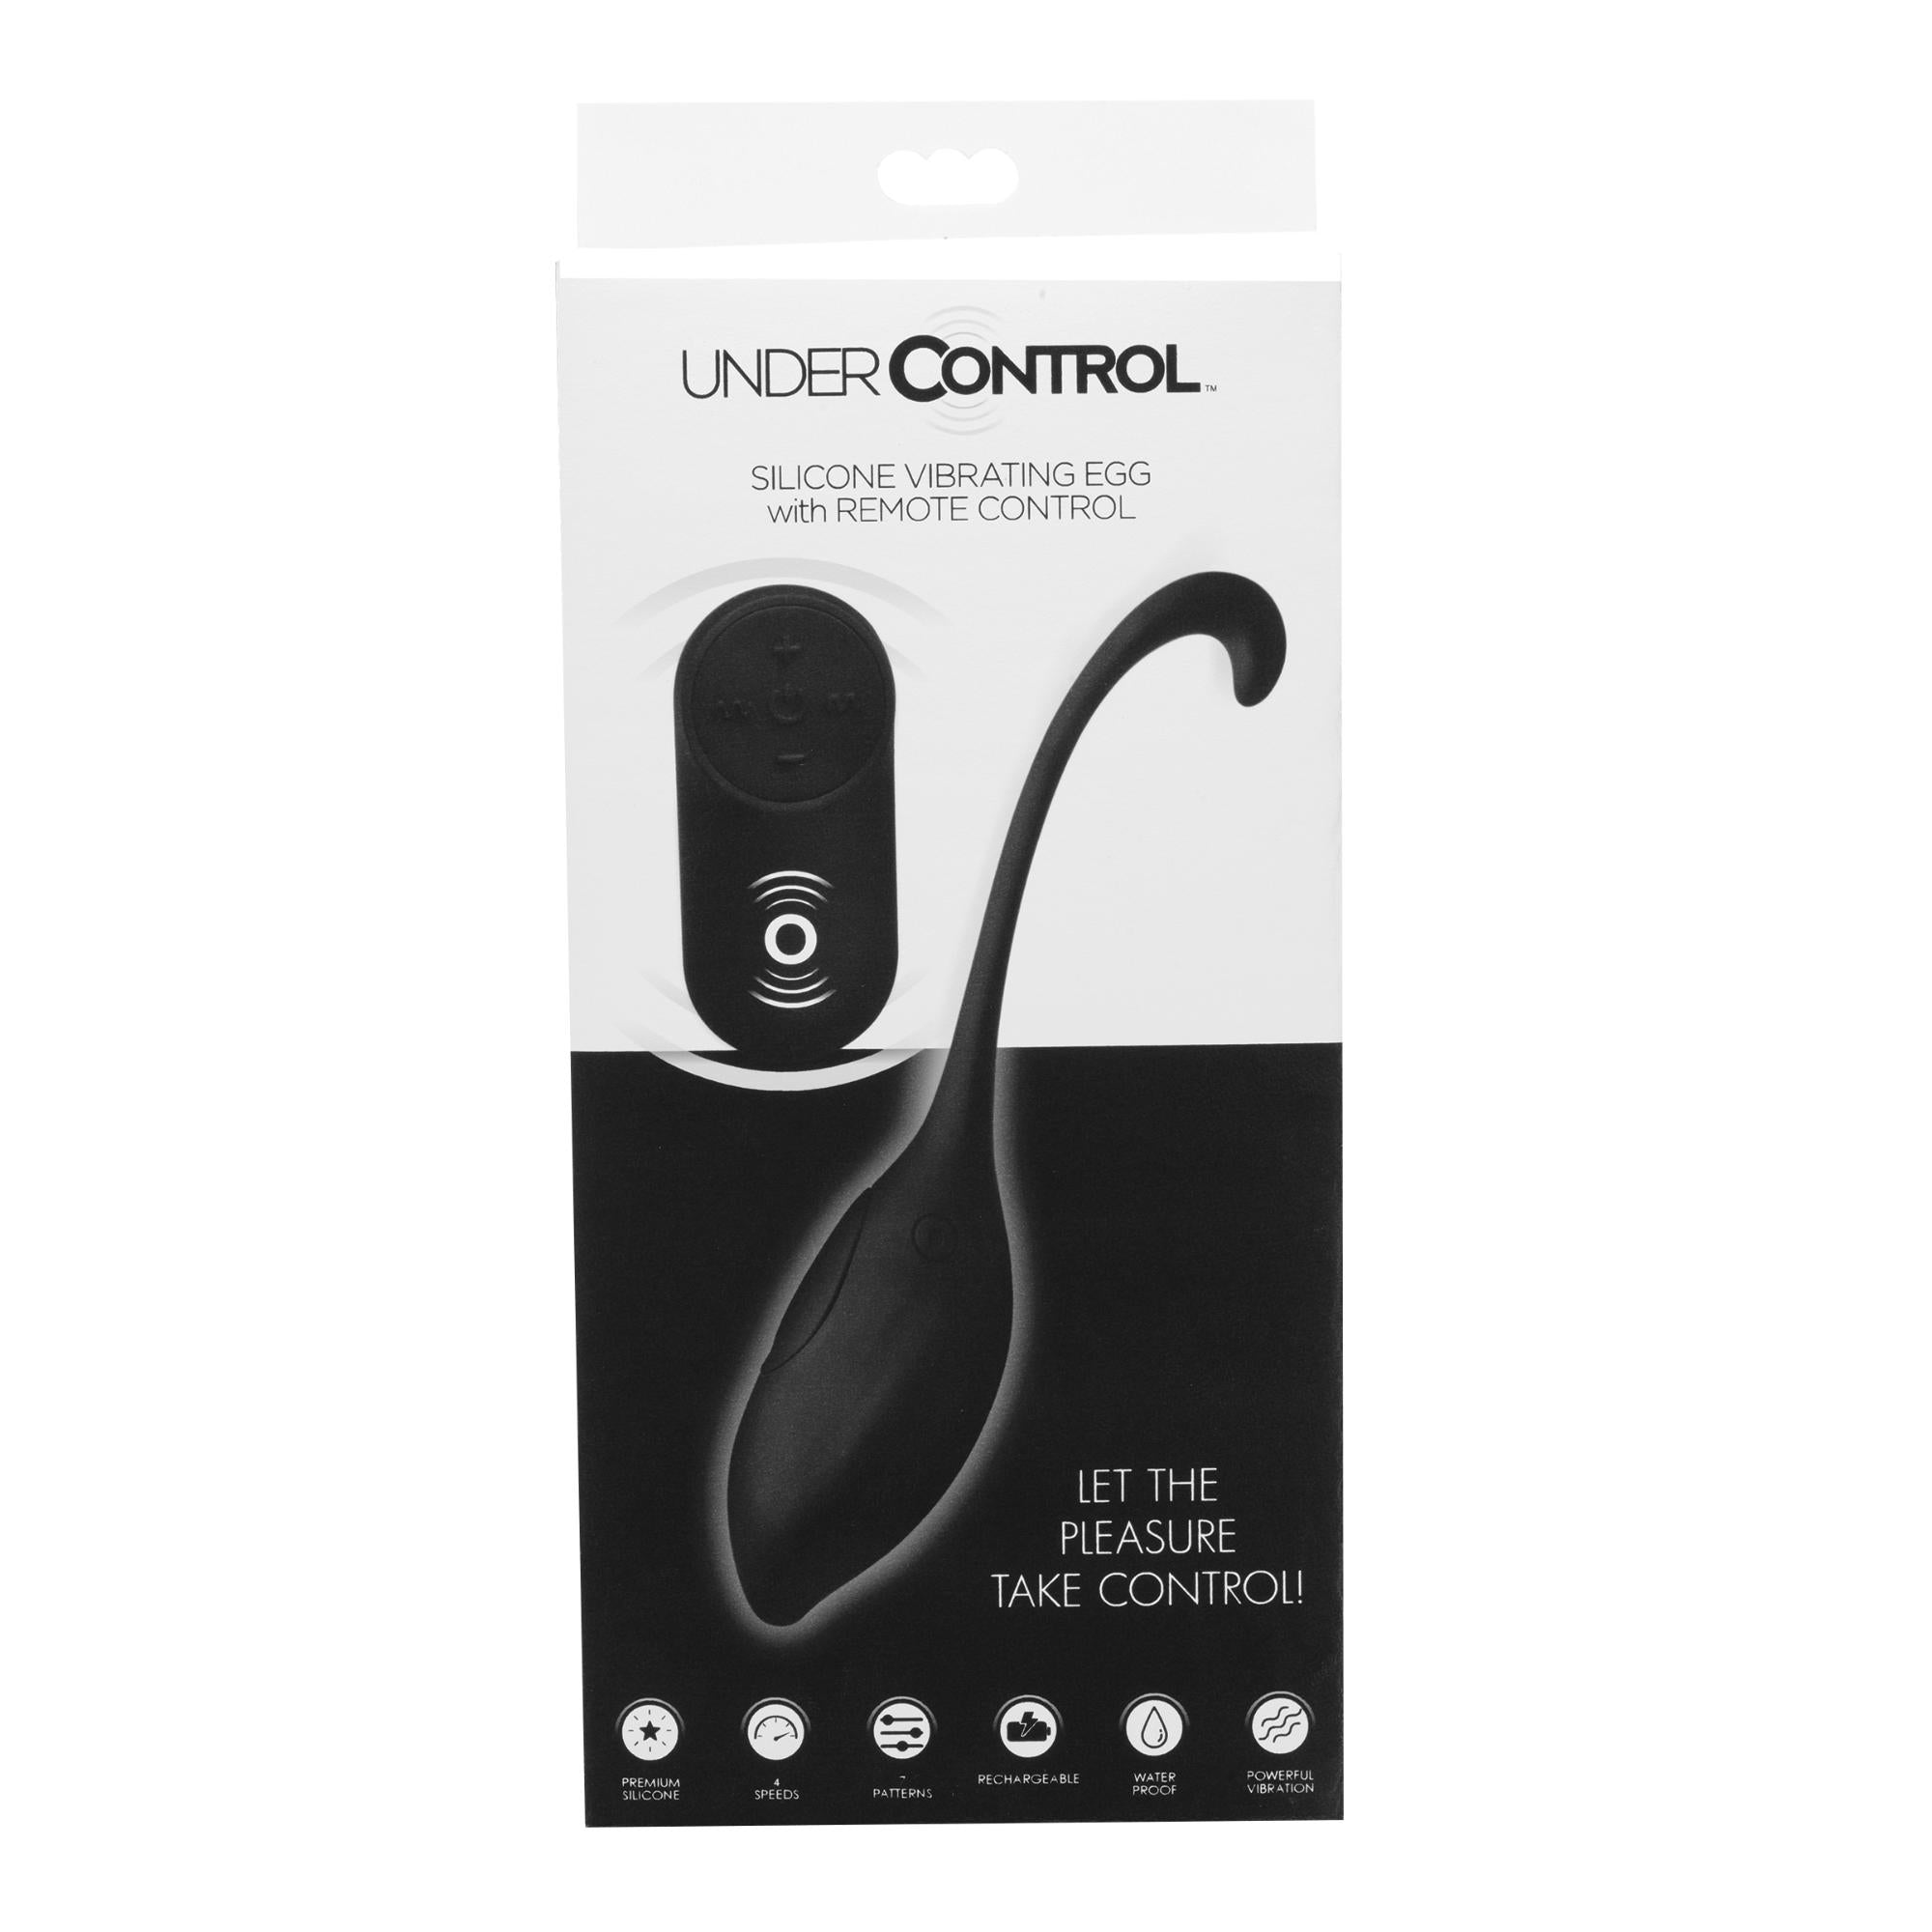 Under Control Silicone Vibrating Egg with Remote Control